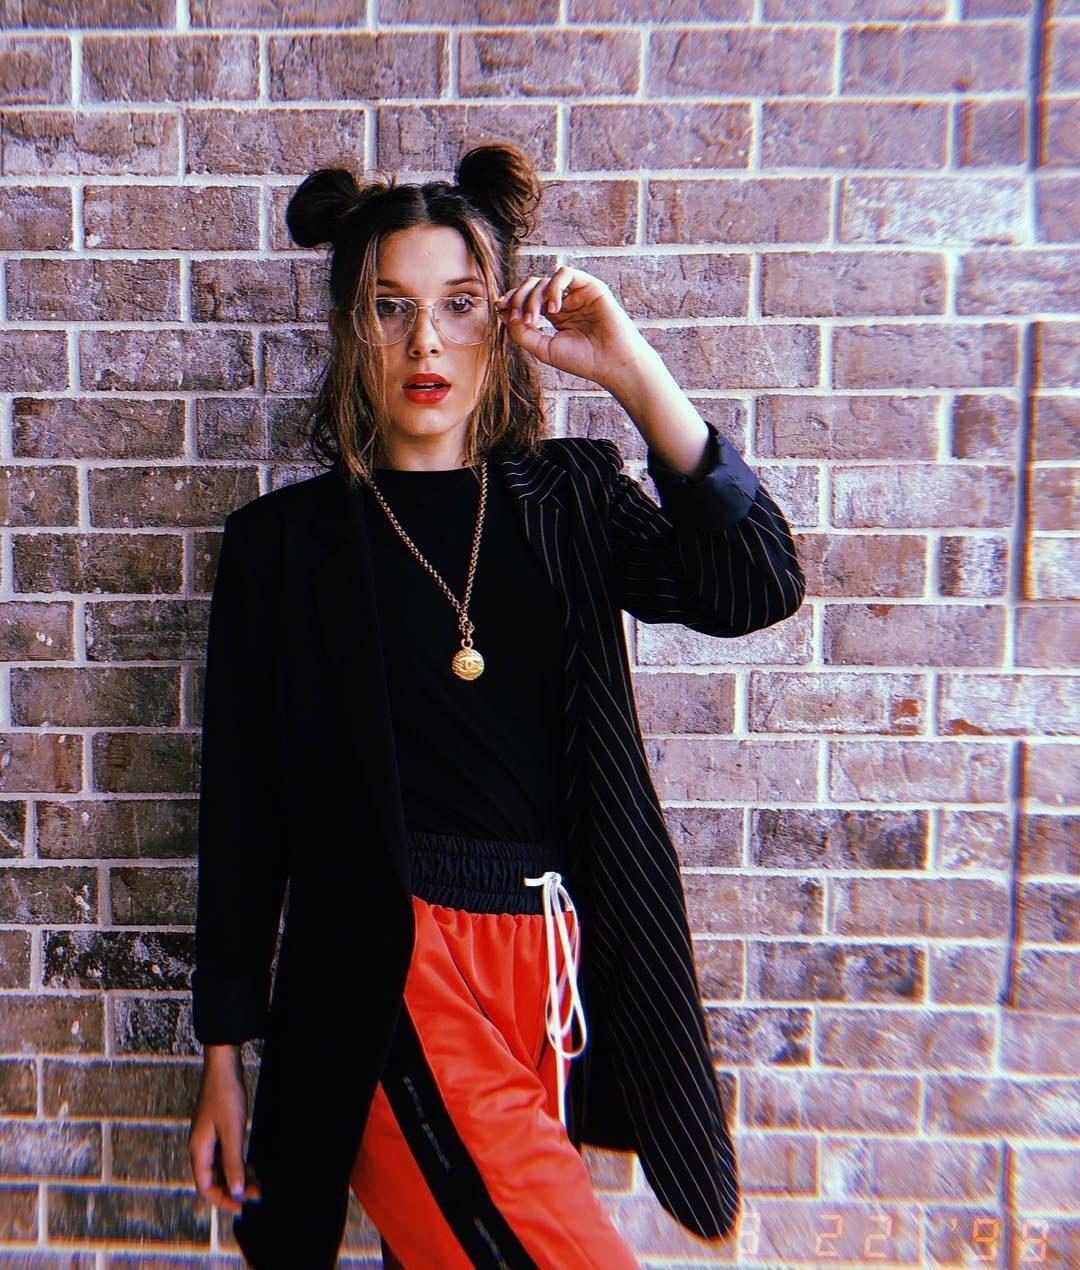 Millie Bobby Brown Stood In for Cardi B at a Maroon 5 Concert, Rap